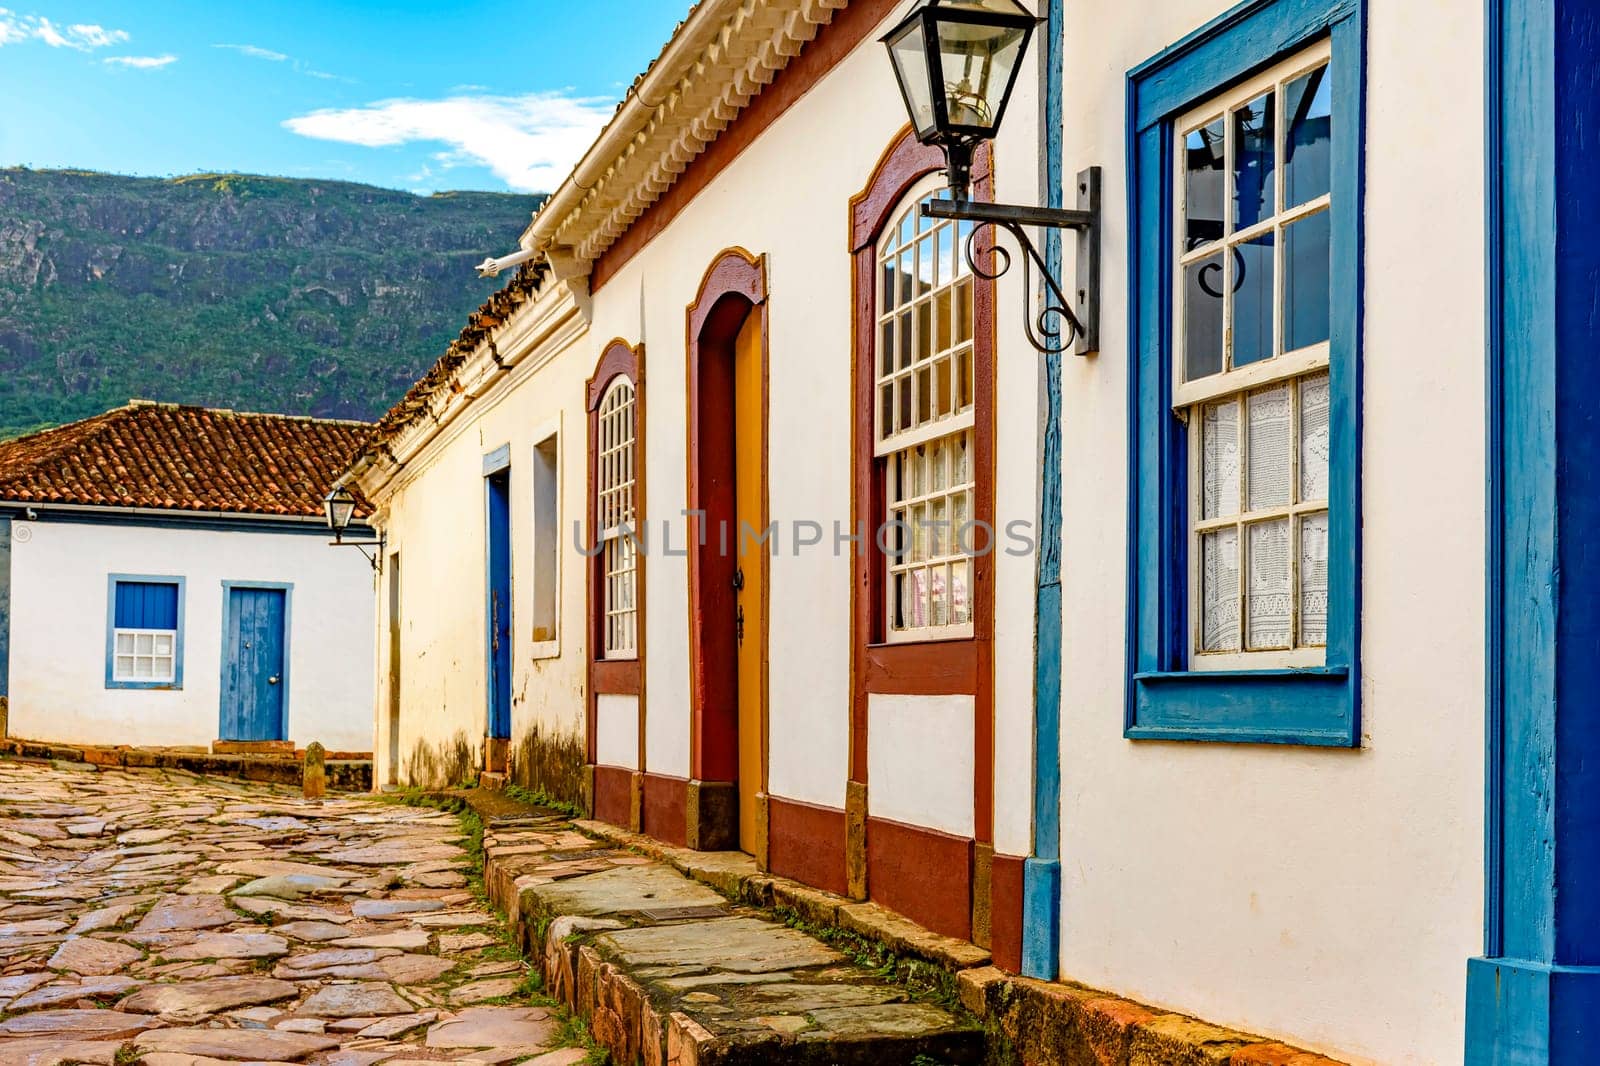 Cobblestone street and facade of old colonial style colorful houses in the historic city of Tiradentes in Minas Gerais, Brazil